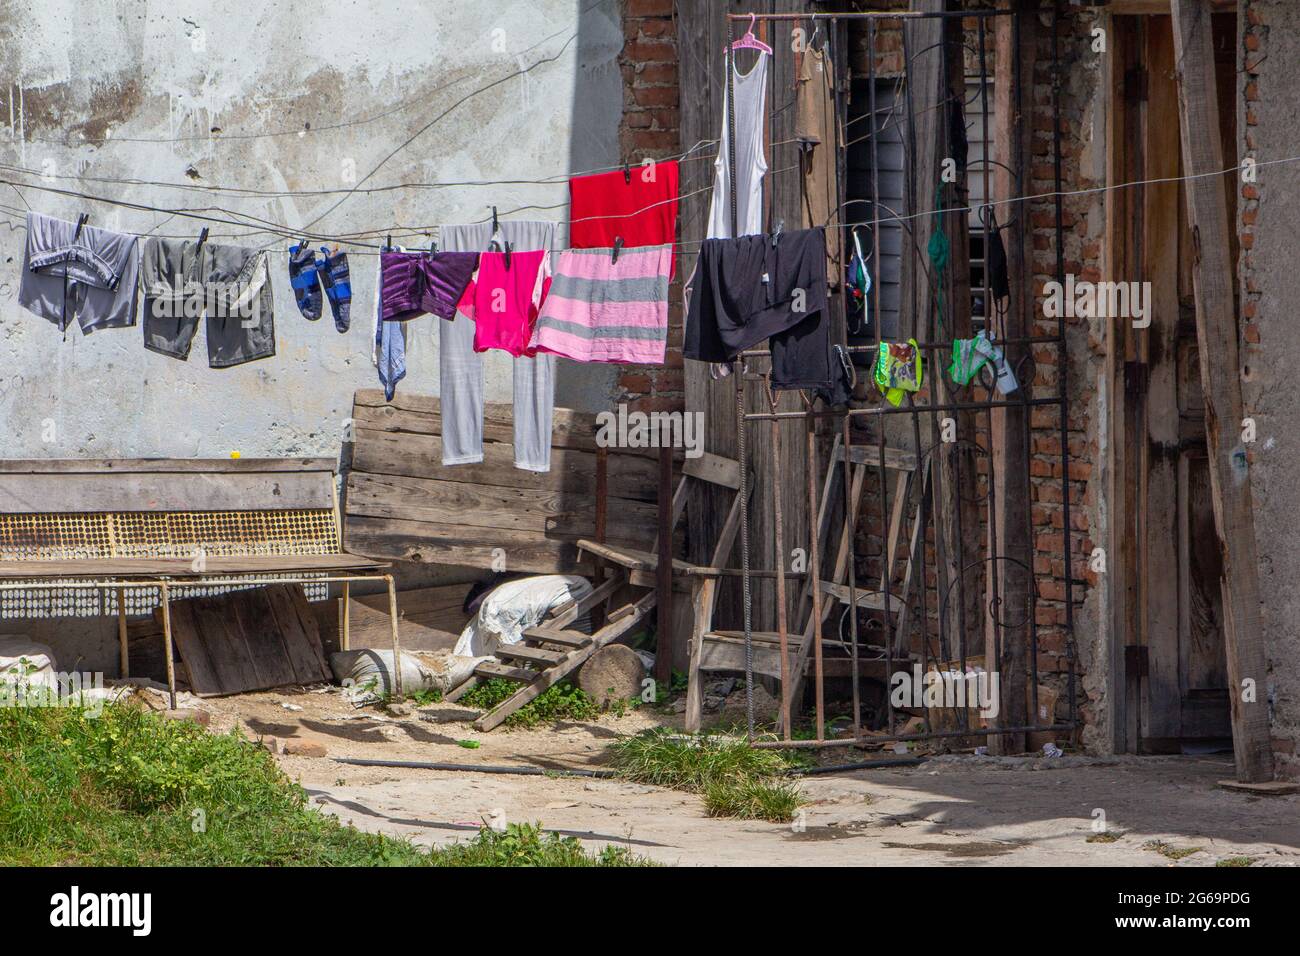 Traditional clothesline in a house in Santiago de Cuba, Cuba. The building is worn out and dilapidated. Stock Photo